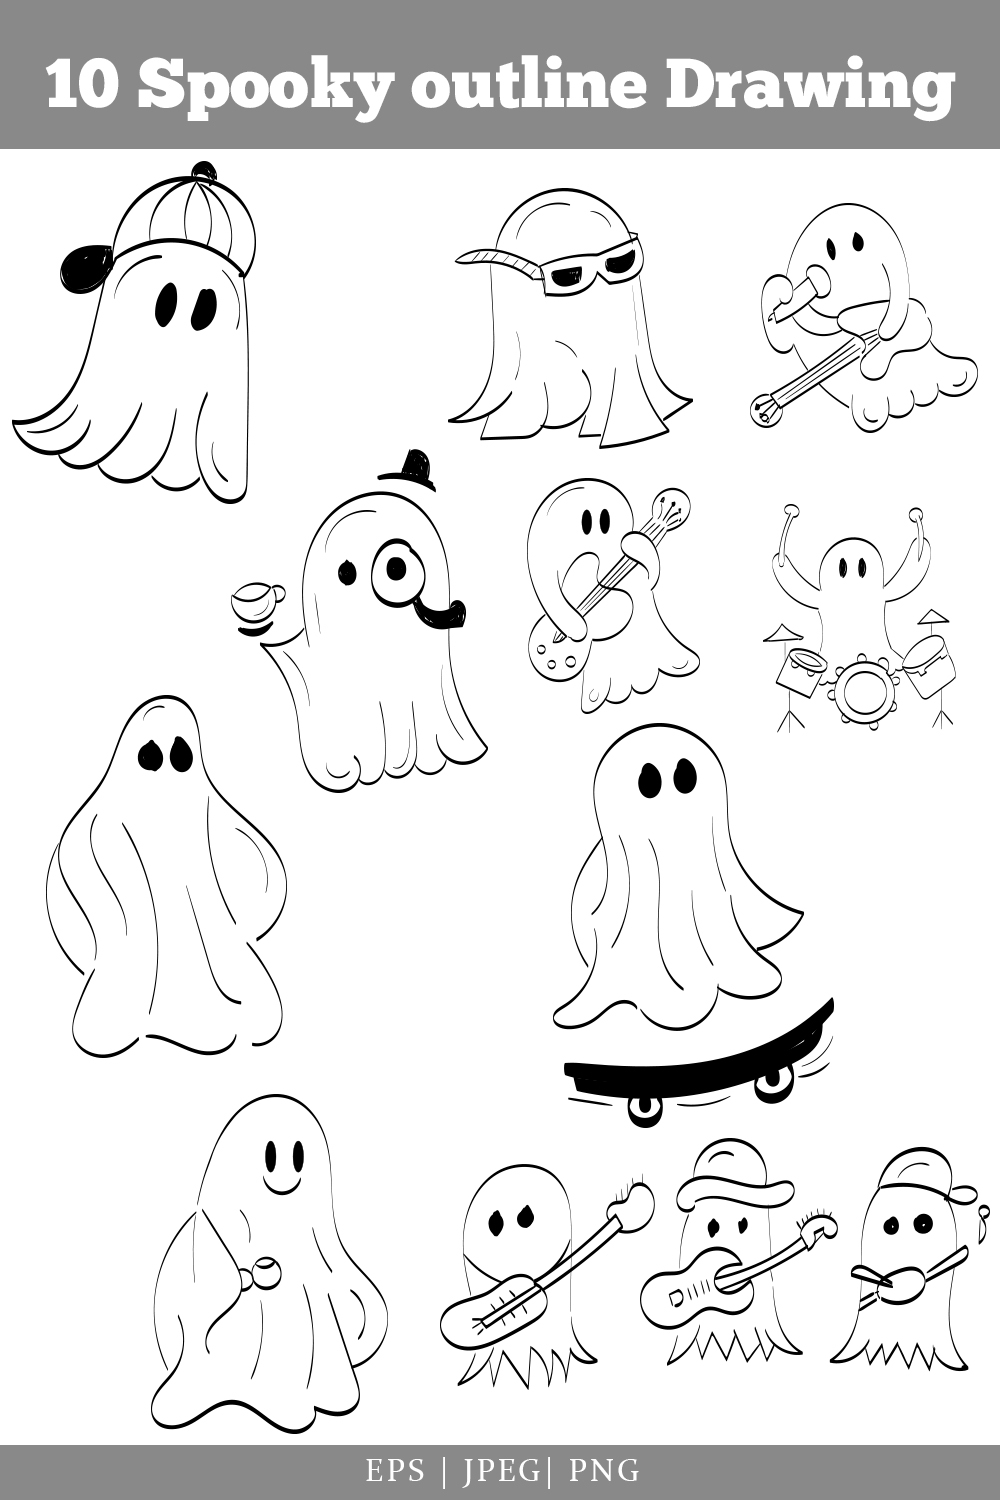 Spooky Ghost Outline Drawing pinterest image.